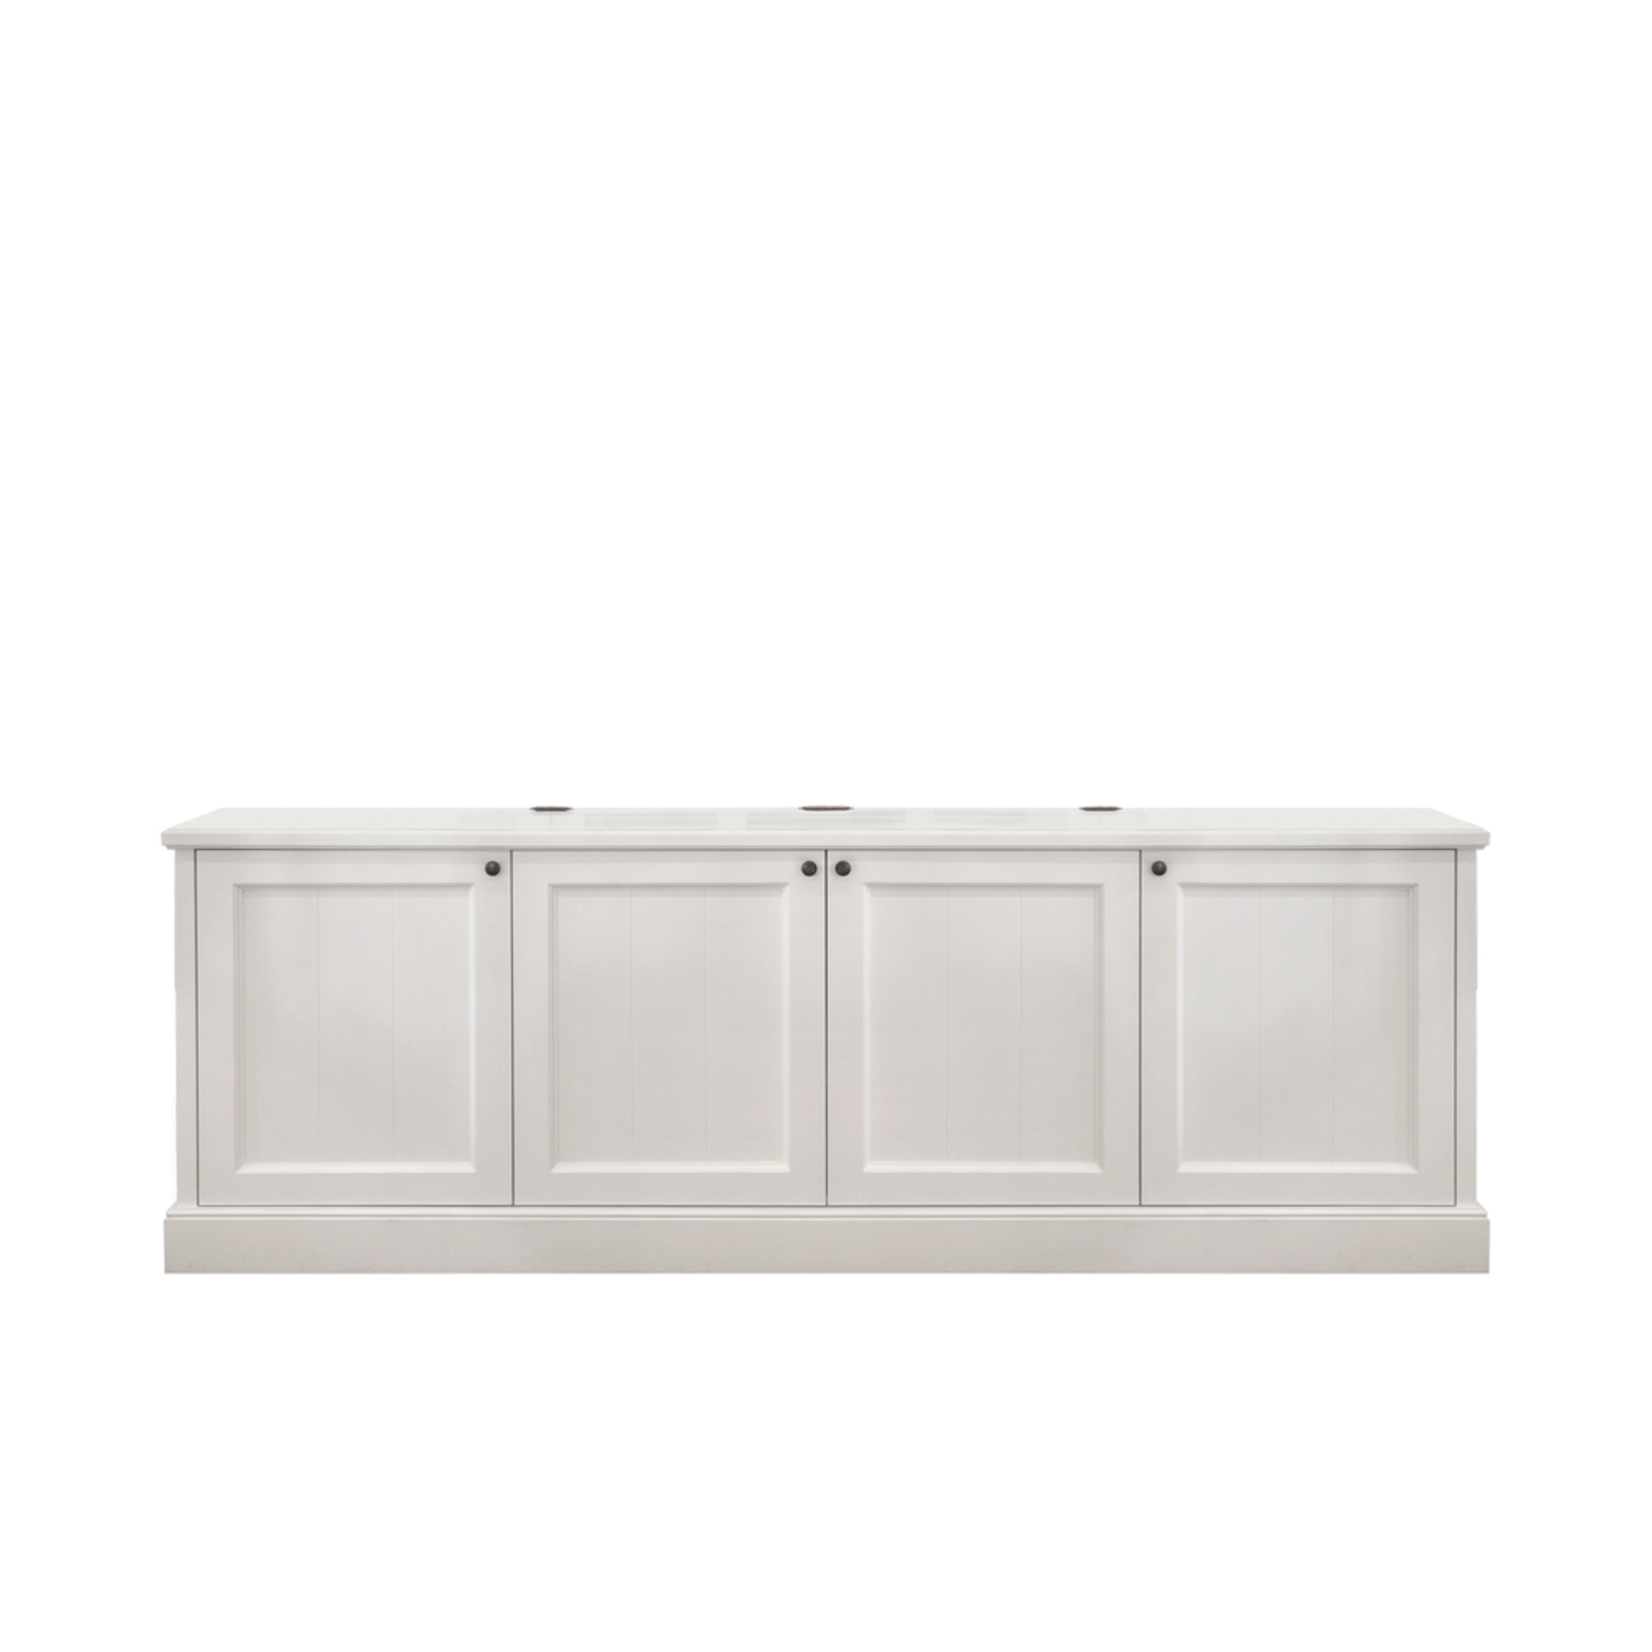 Lift living 245x42xH85cm mit and more - TV-Sideboard Spectroom weiss GmbH